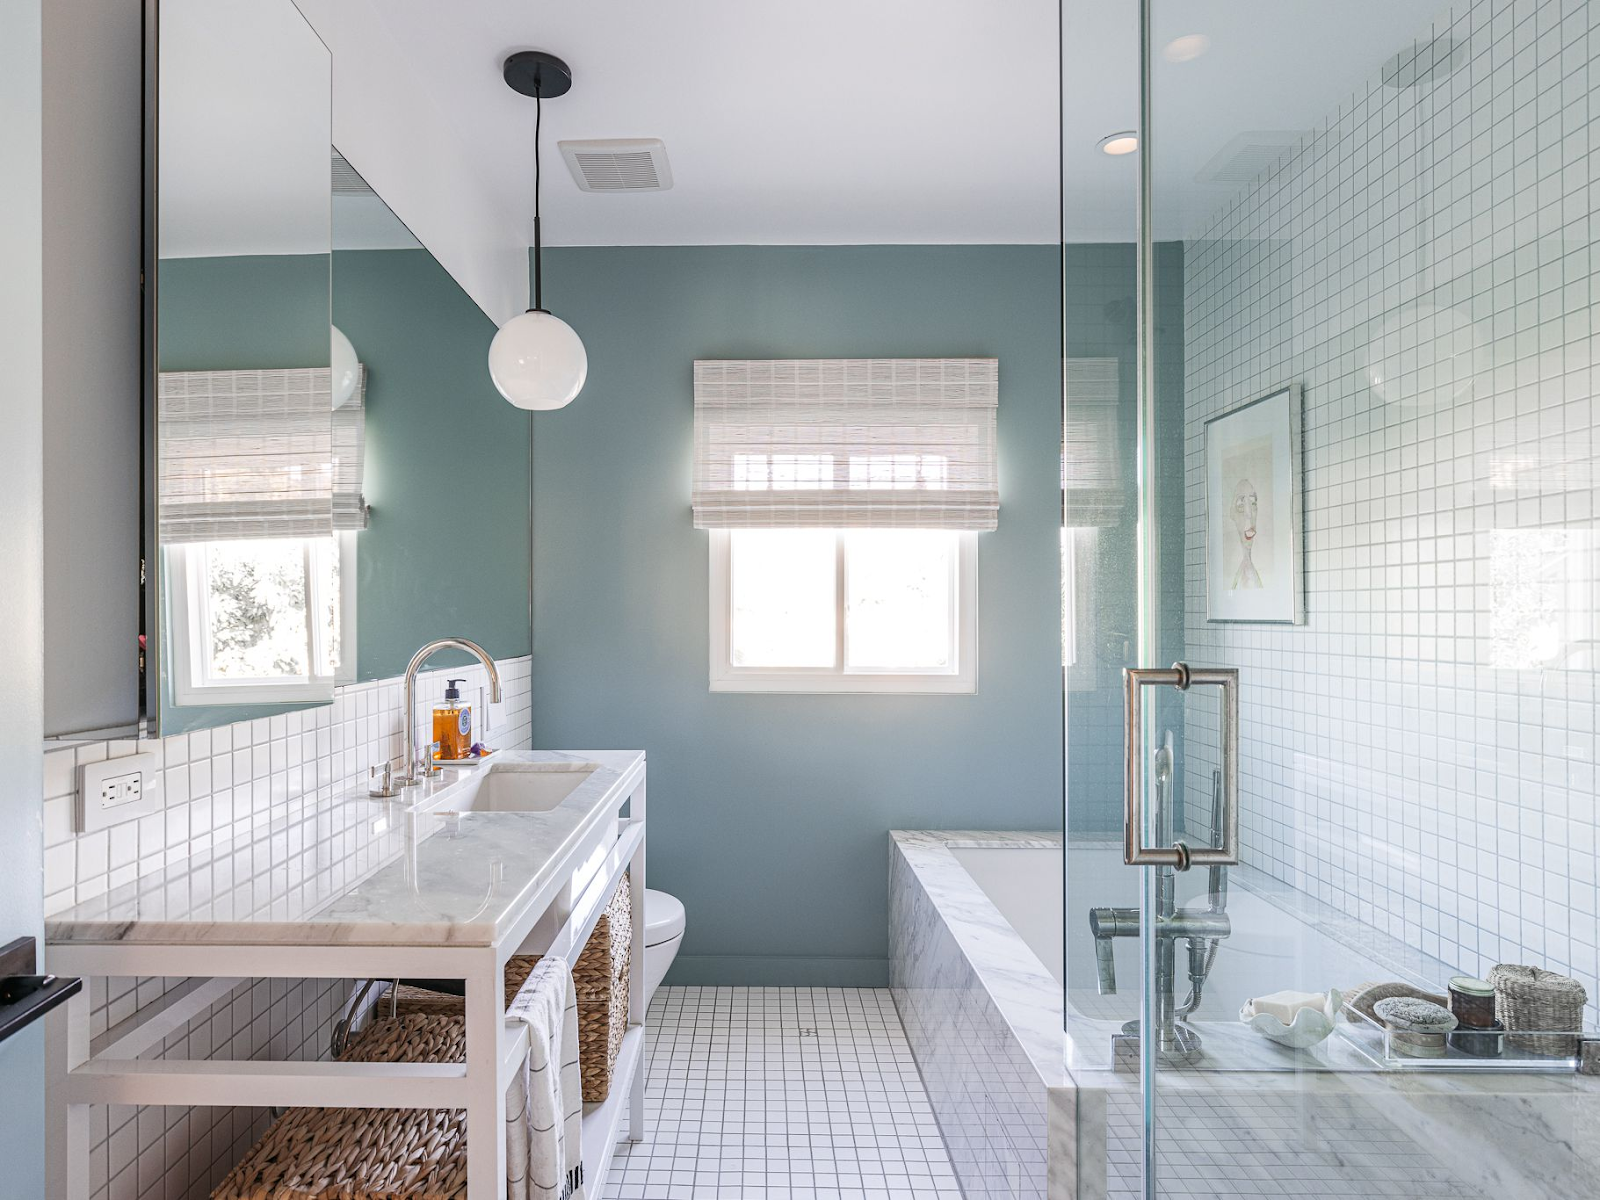 Uncommon tips for your bathroom tiles